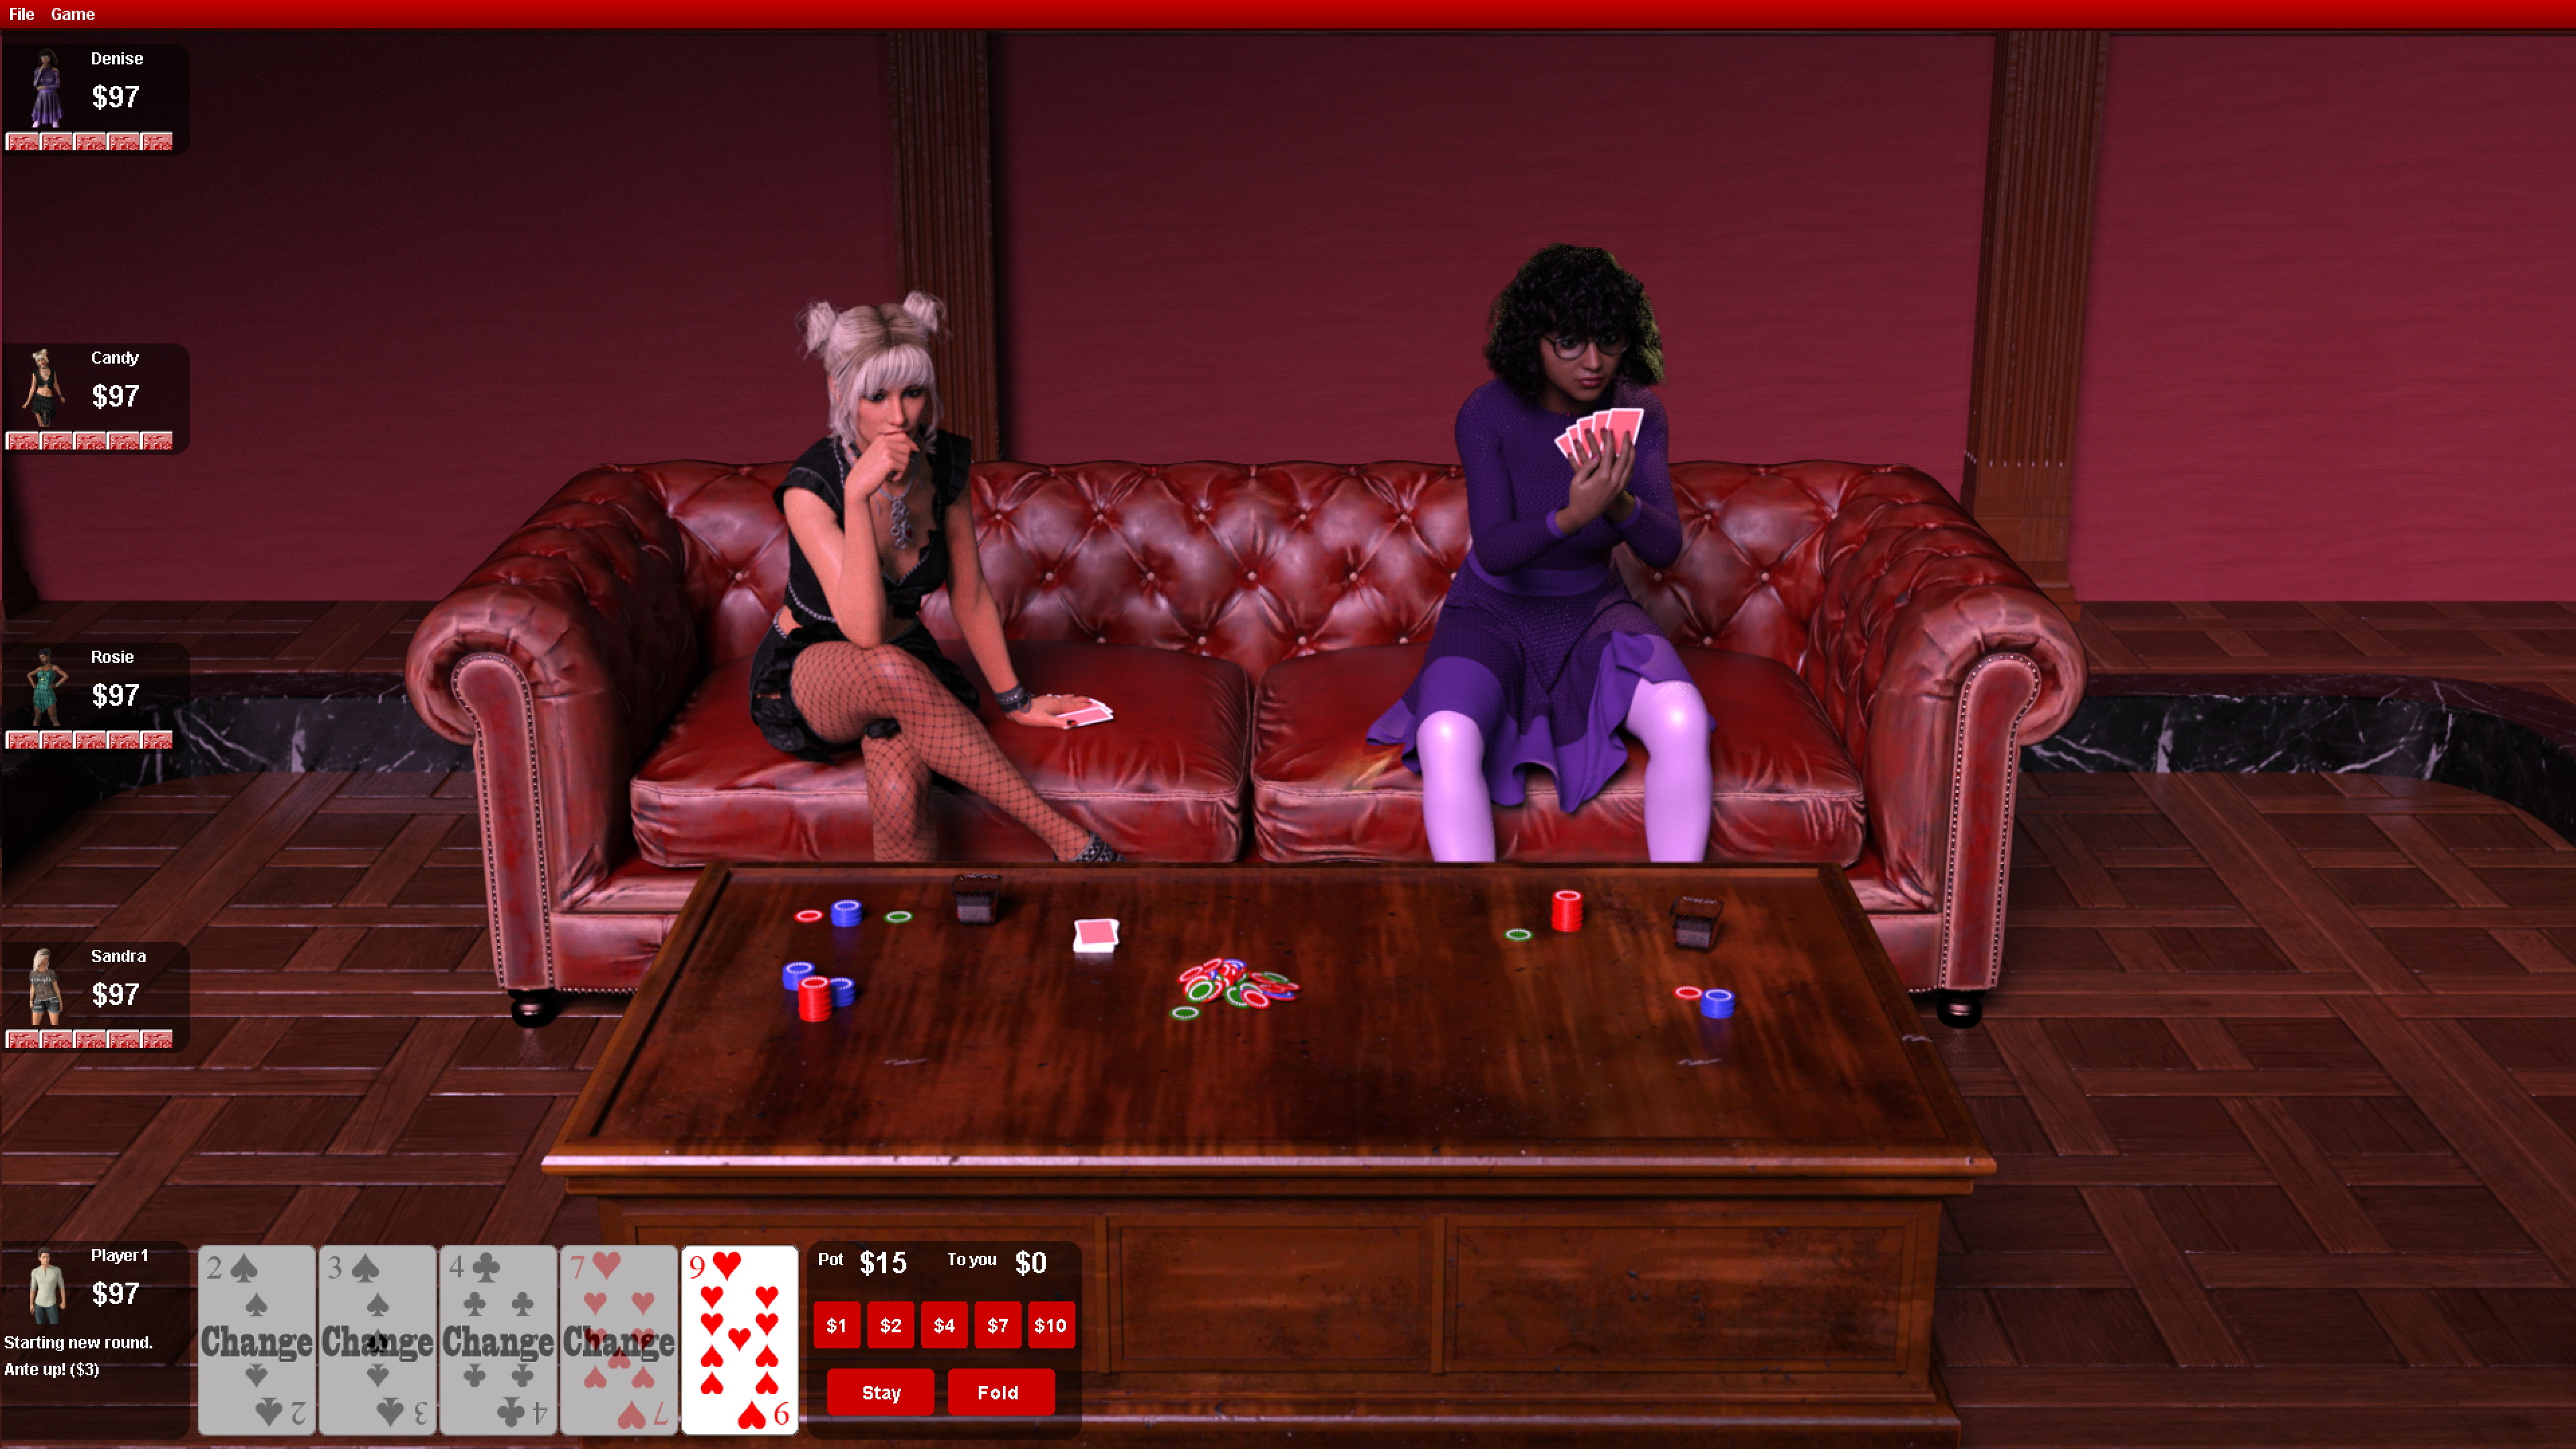 California Strip Poker 0.9 is now available! - California Strip Poker